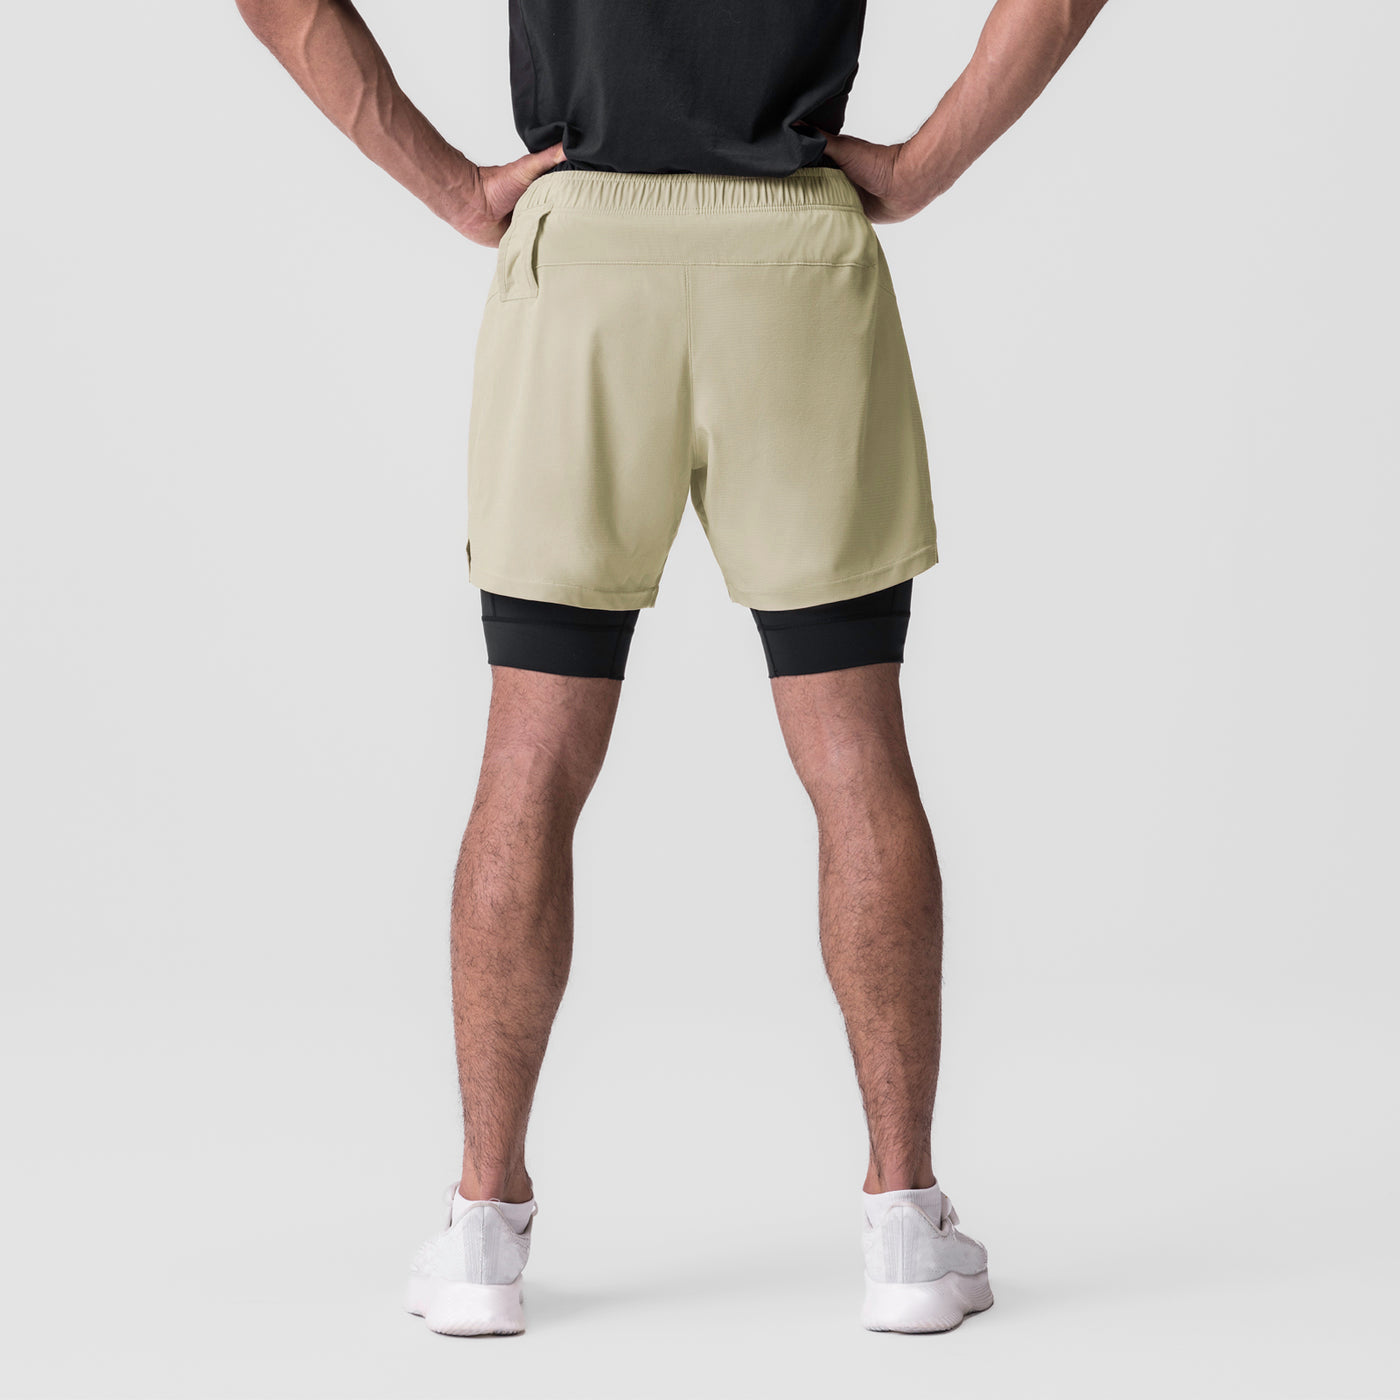 Men’s 2 in 1 Quick Dry Workout Shorts - Black